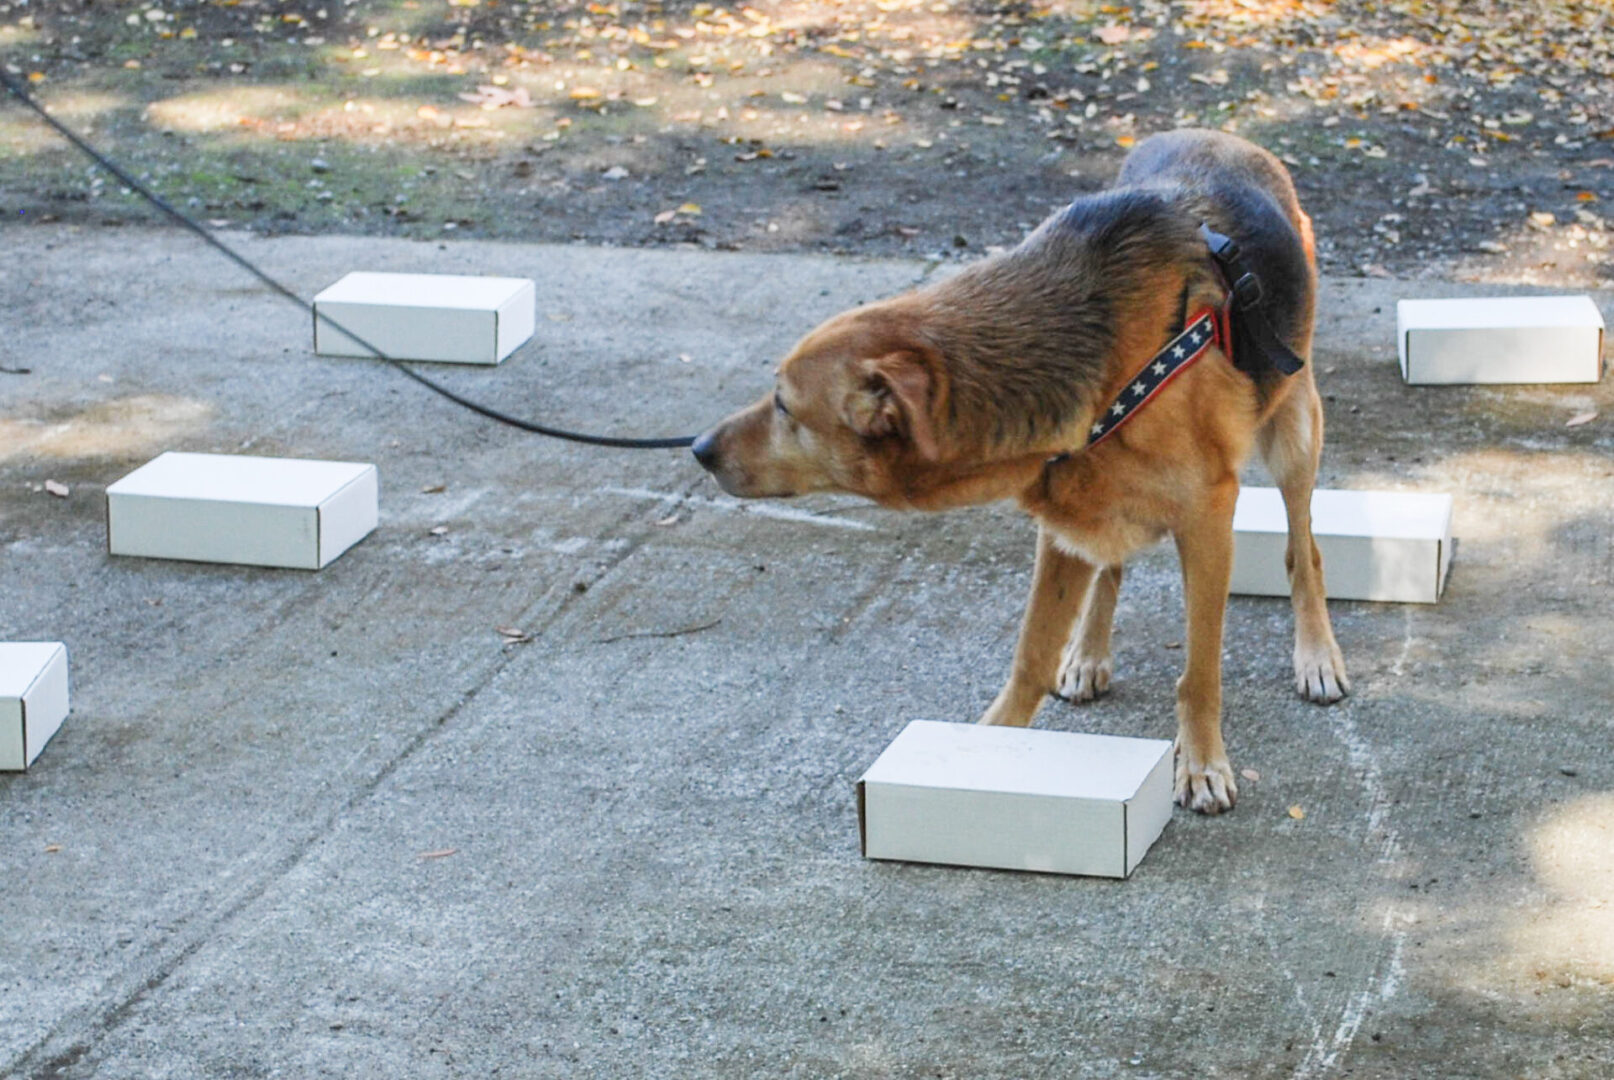 Shepherd Mix finds odor in a plain box practicing scent work